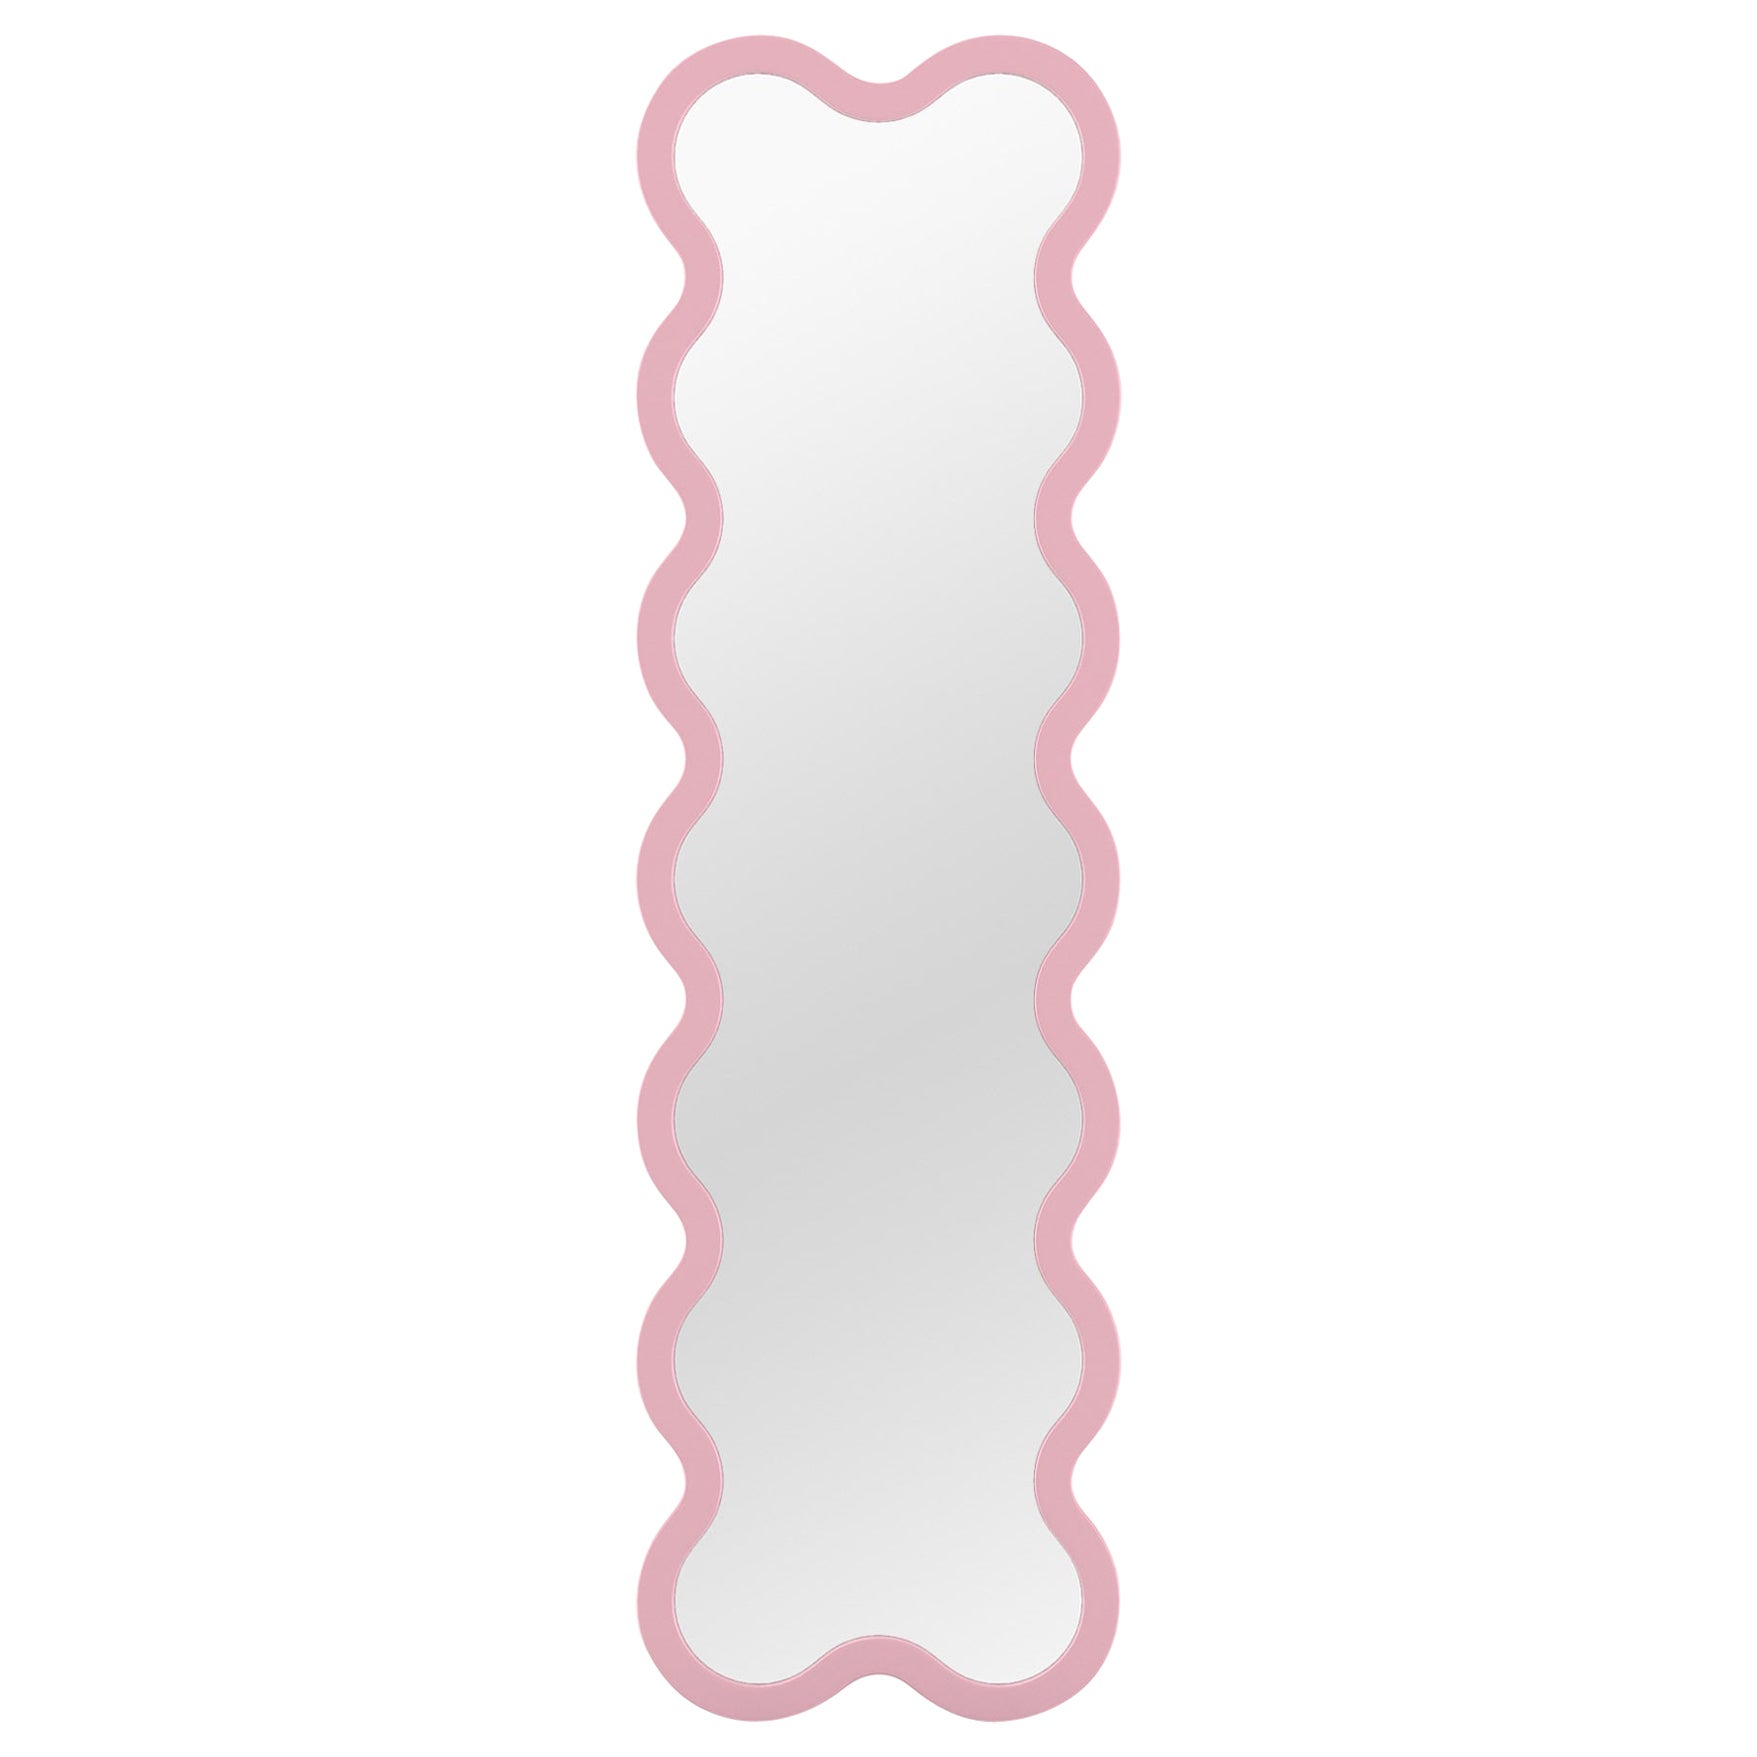 Contemporary Mirror 'Hvyli 14' by Oitoproducts, Light Pink Frame For Sale